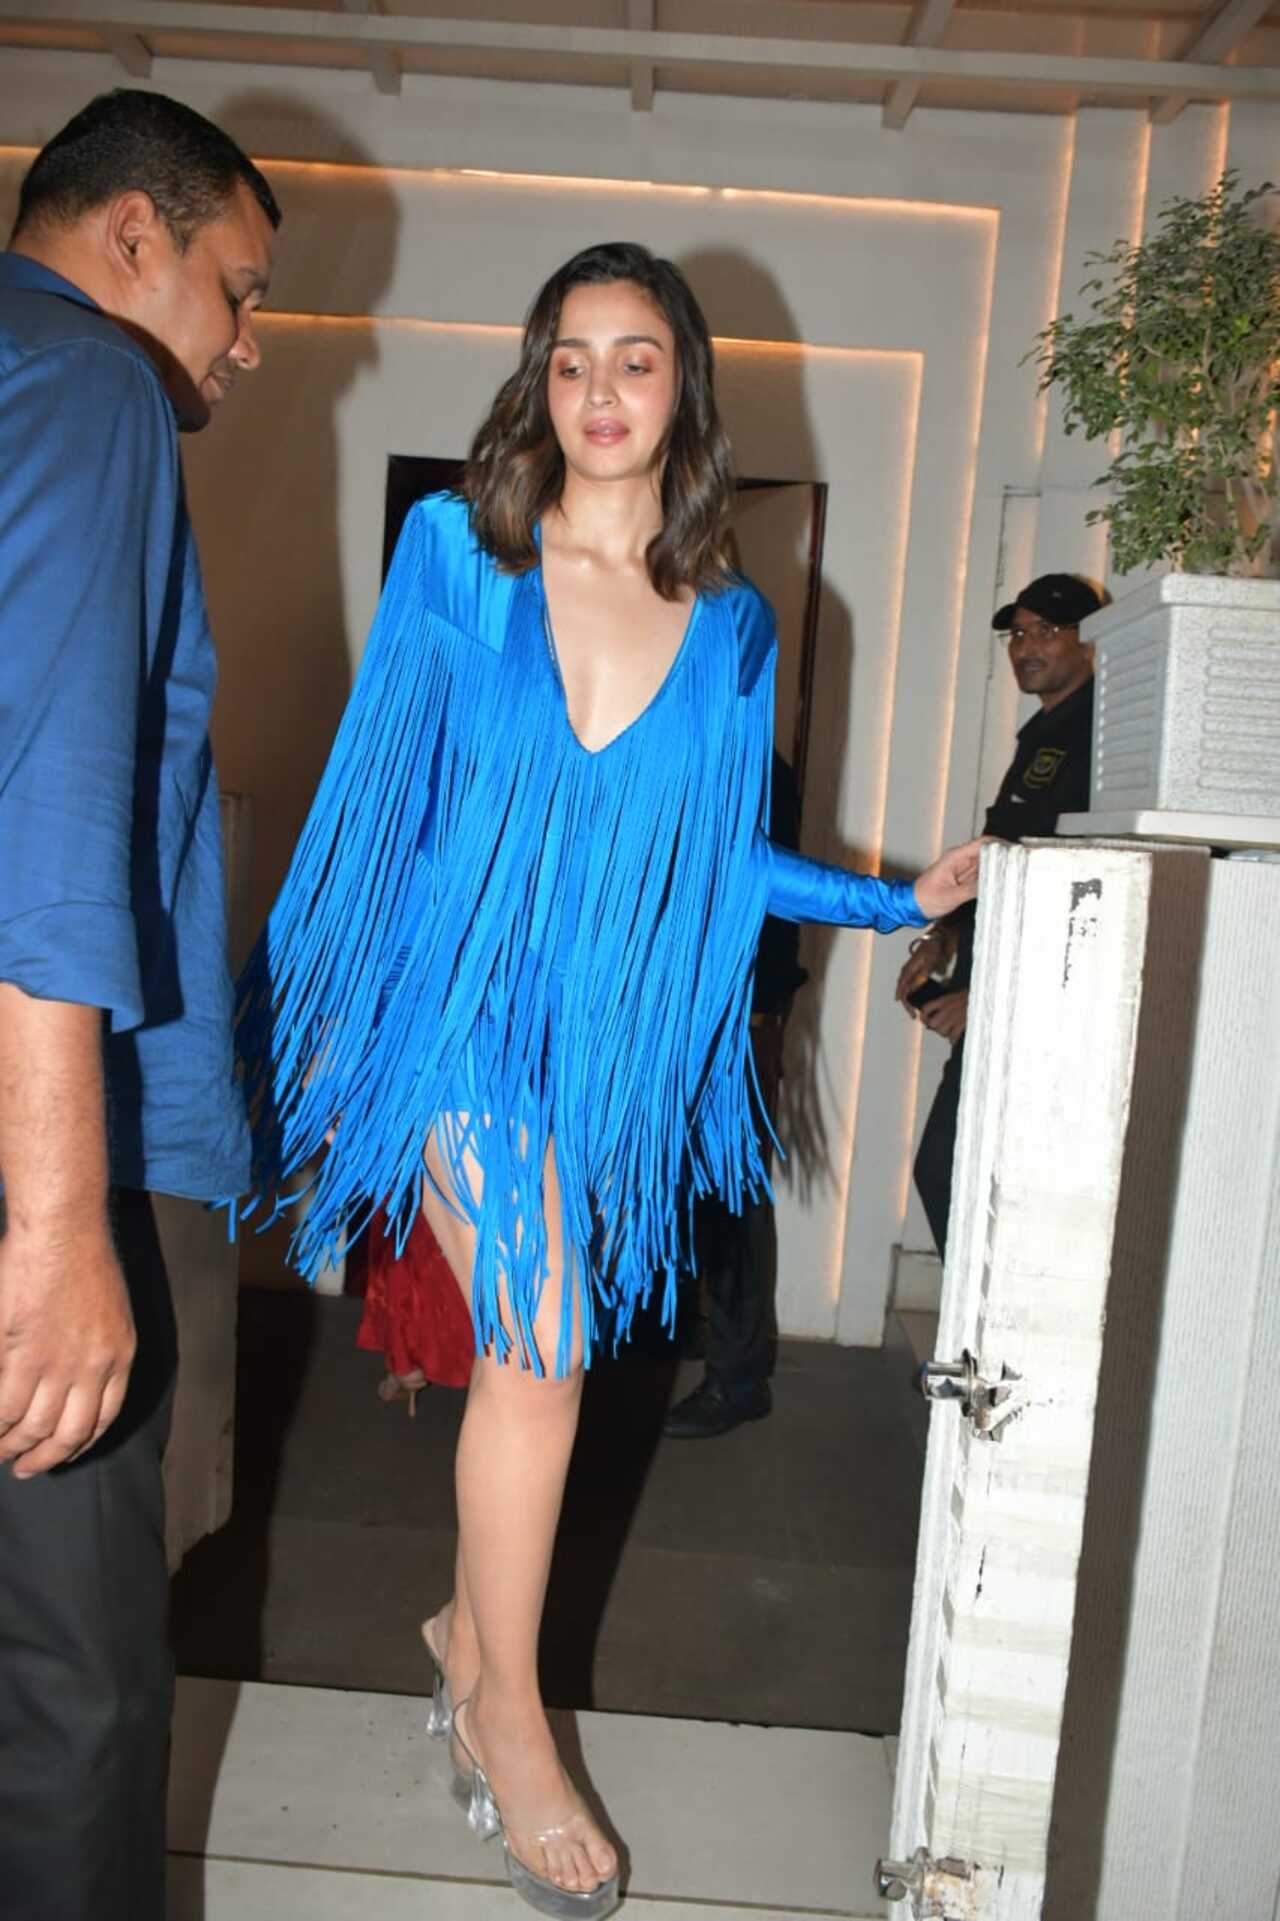 Alia's outfit had tassels cascading from the neckline to the hemline and beyond. She paired it with transparent heels